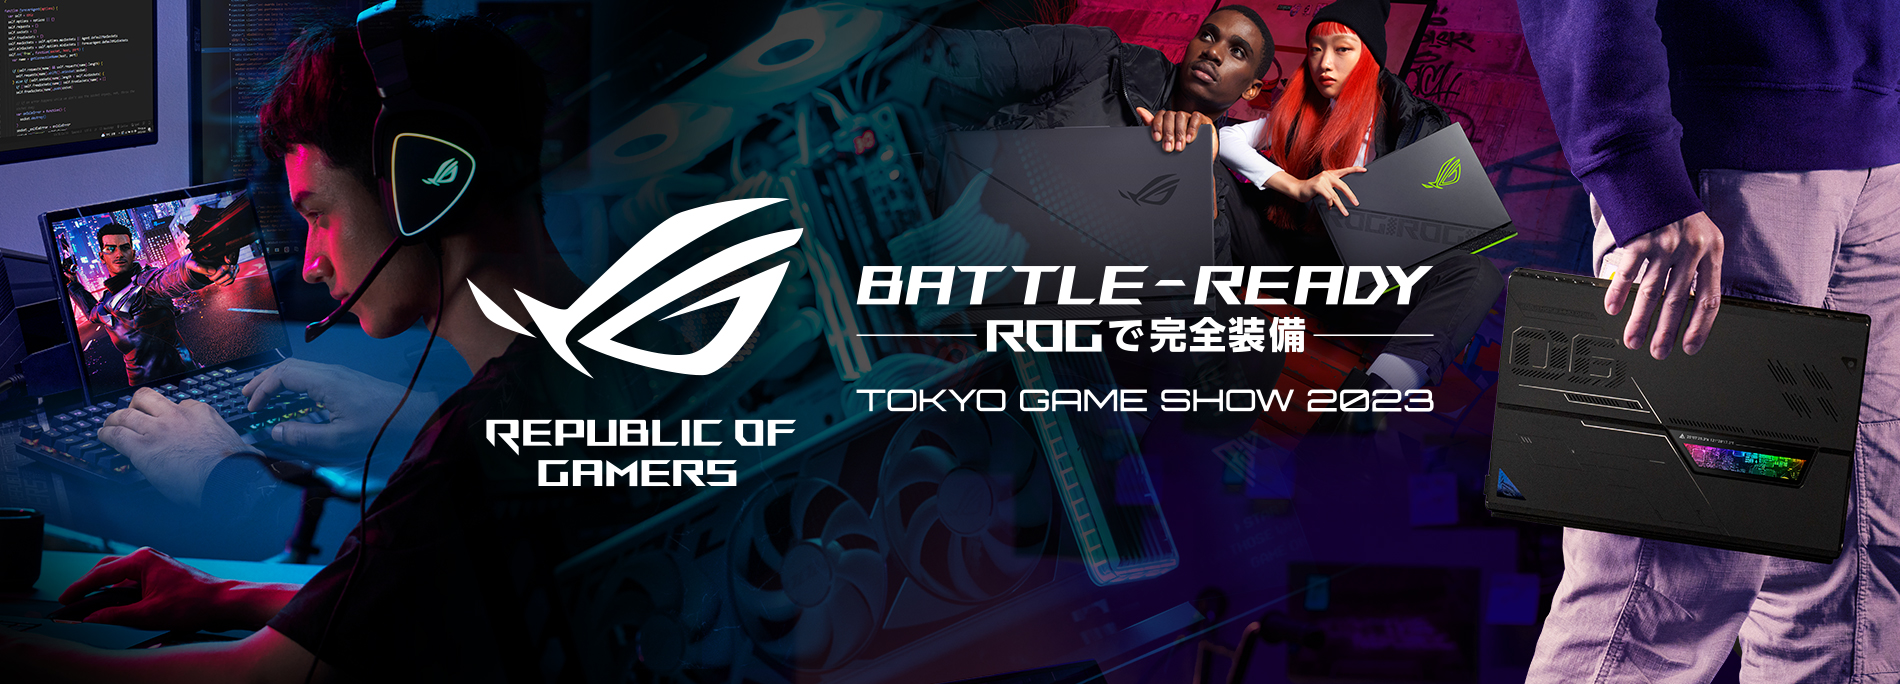 BATTLE-READY ROGで完全装備 Tokyo Game Show 2023